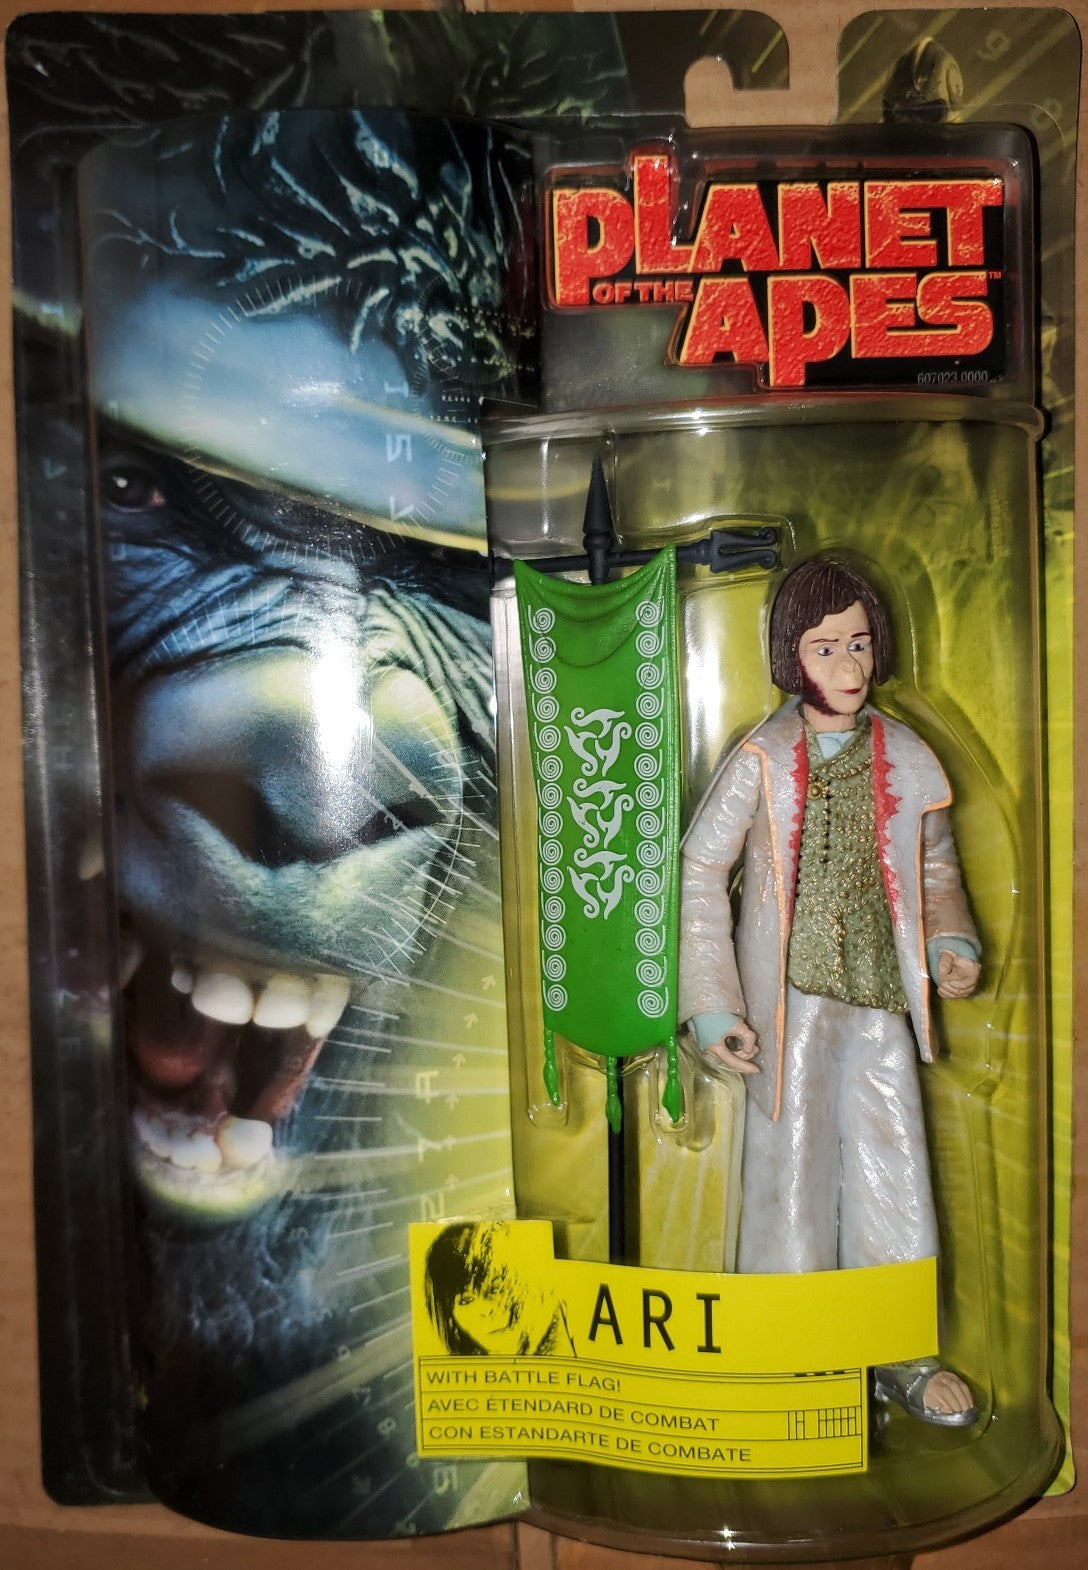 Planet of the Apes 2001 movie ARI action figure